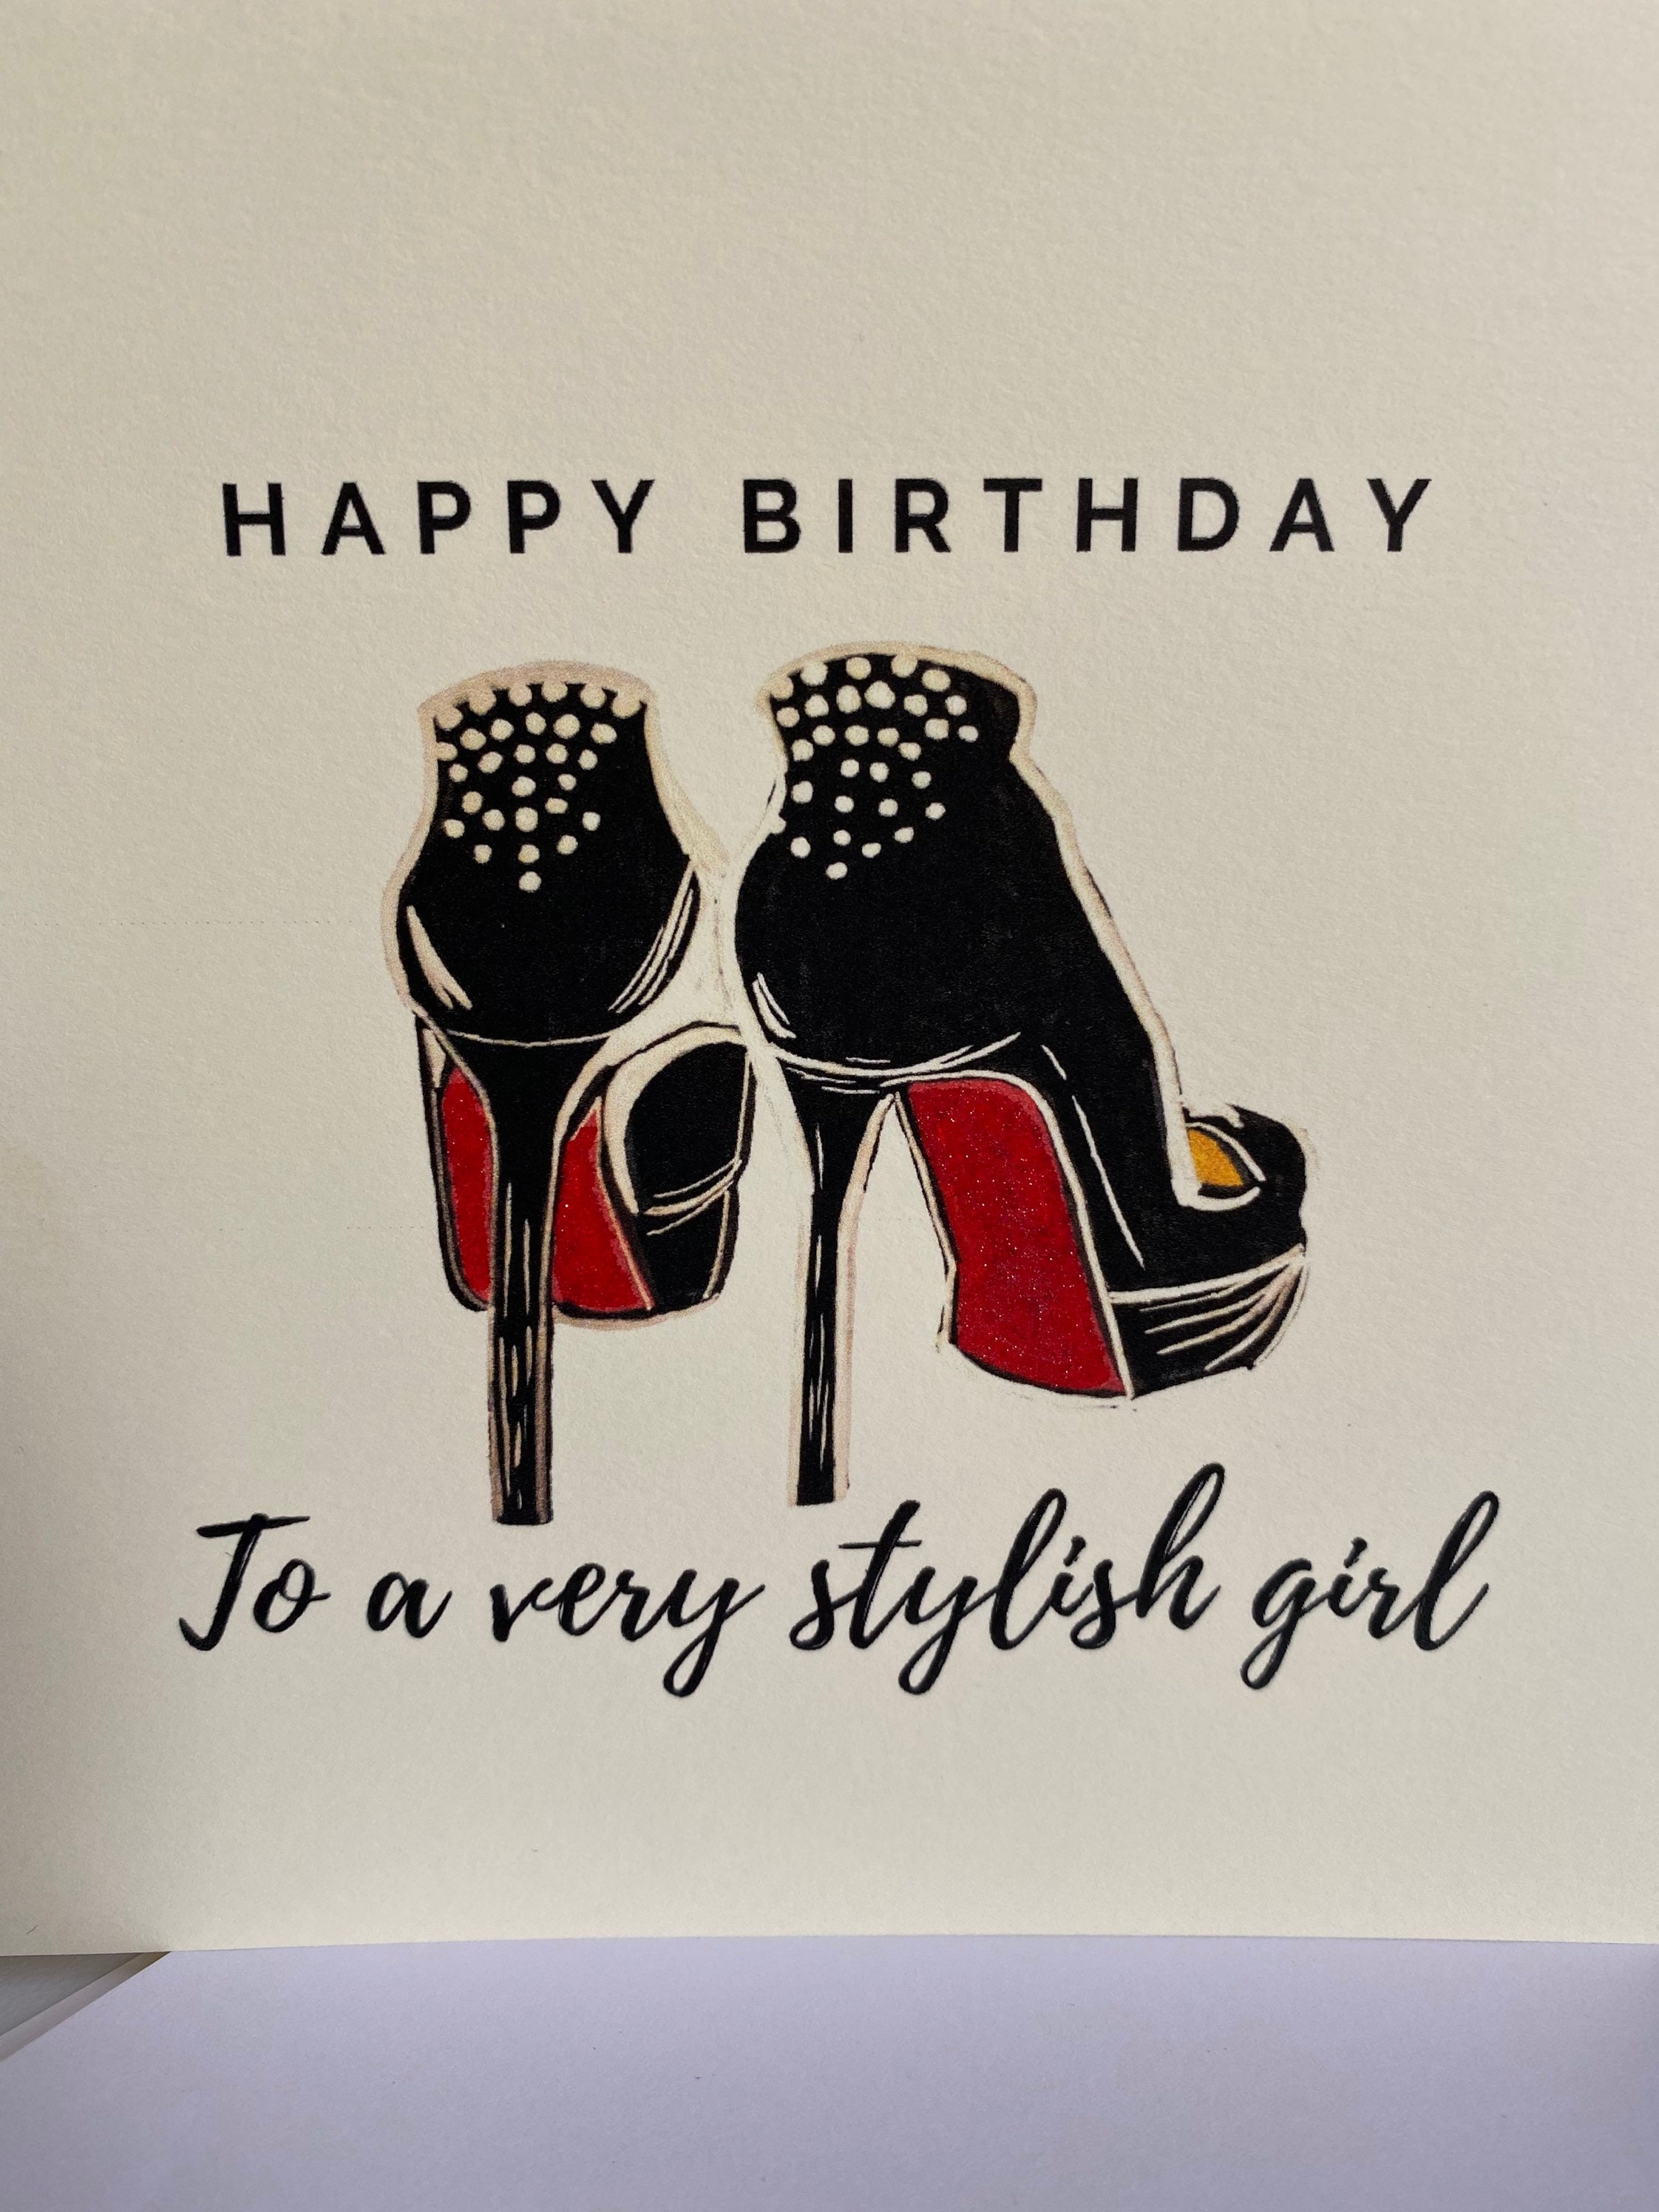 Ladies LOUBOUTIN SHOES Birthday Card - Wife Girlfriend Mother